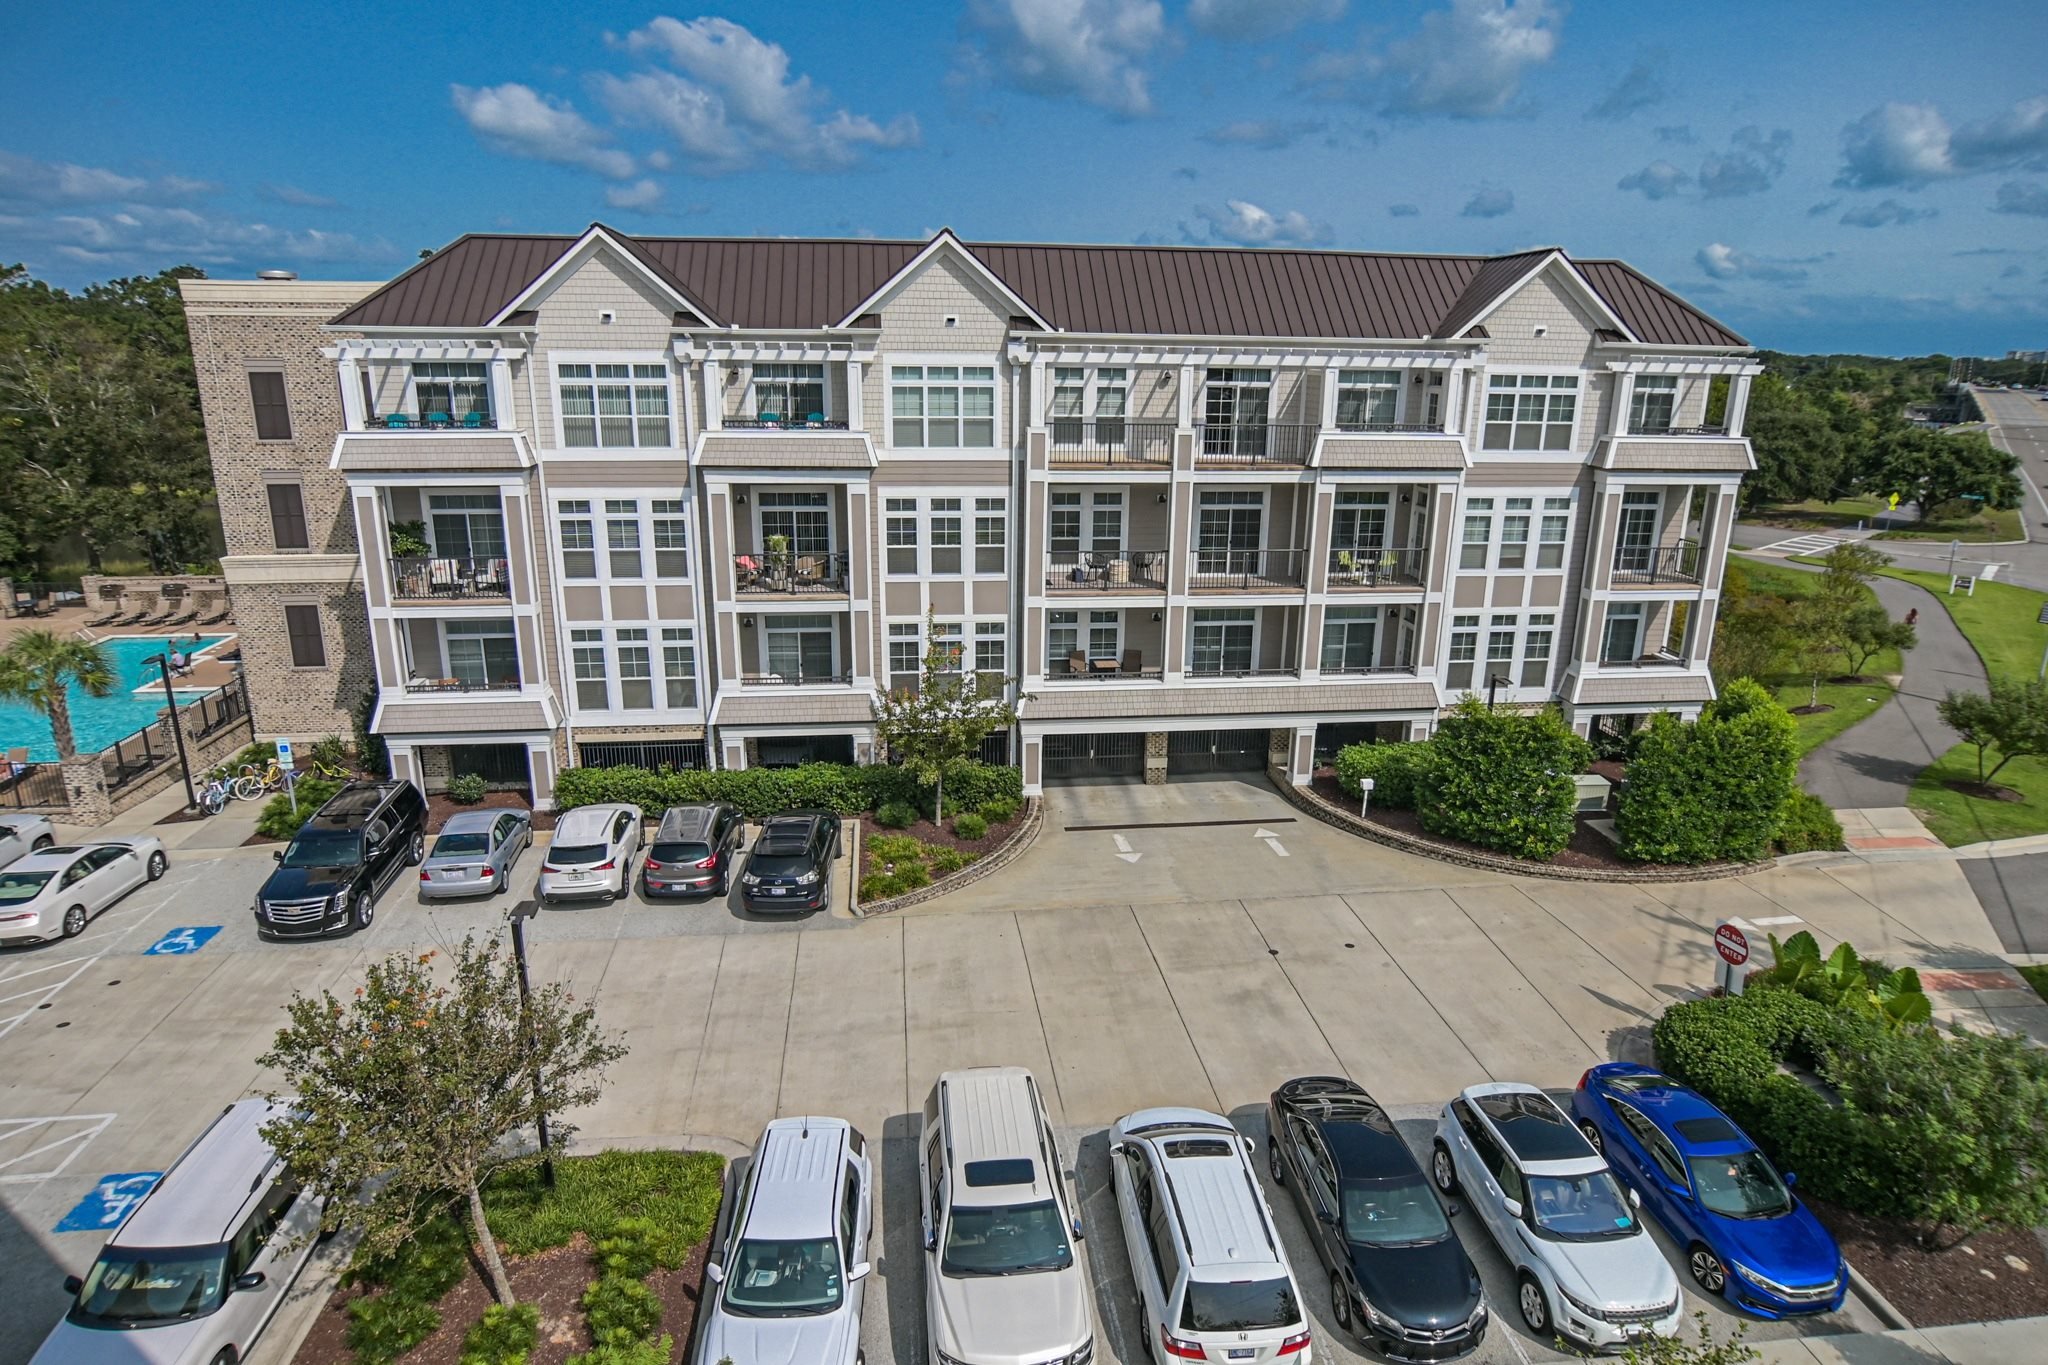 Exterior Views of Grand View Luxury Apartments in Wilmington, NC